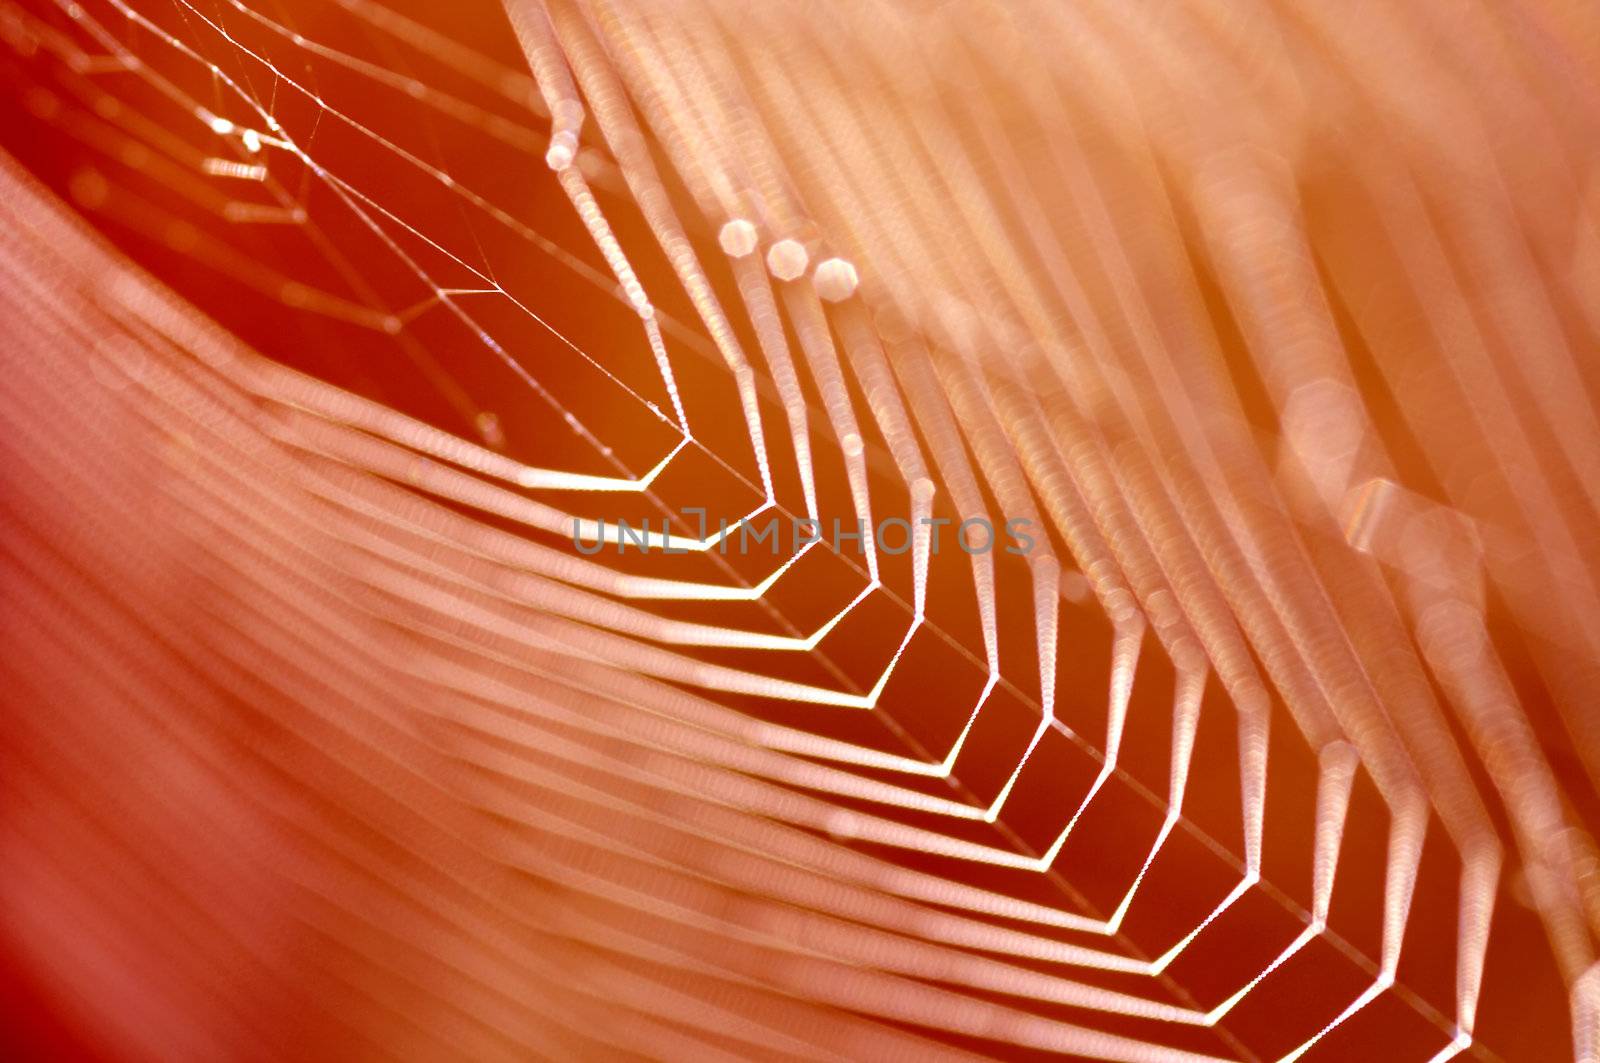 Abstract close-up of the web of spider - cobweb